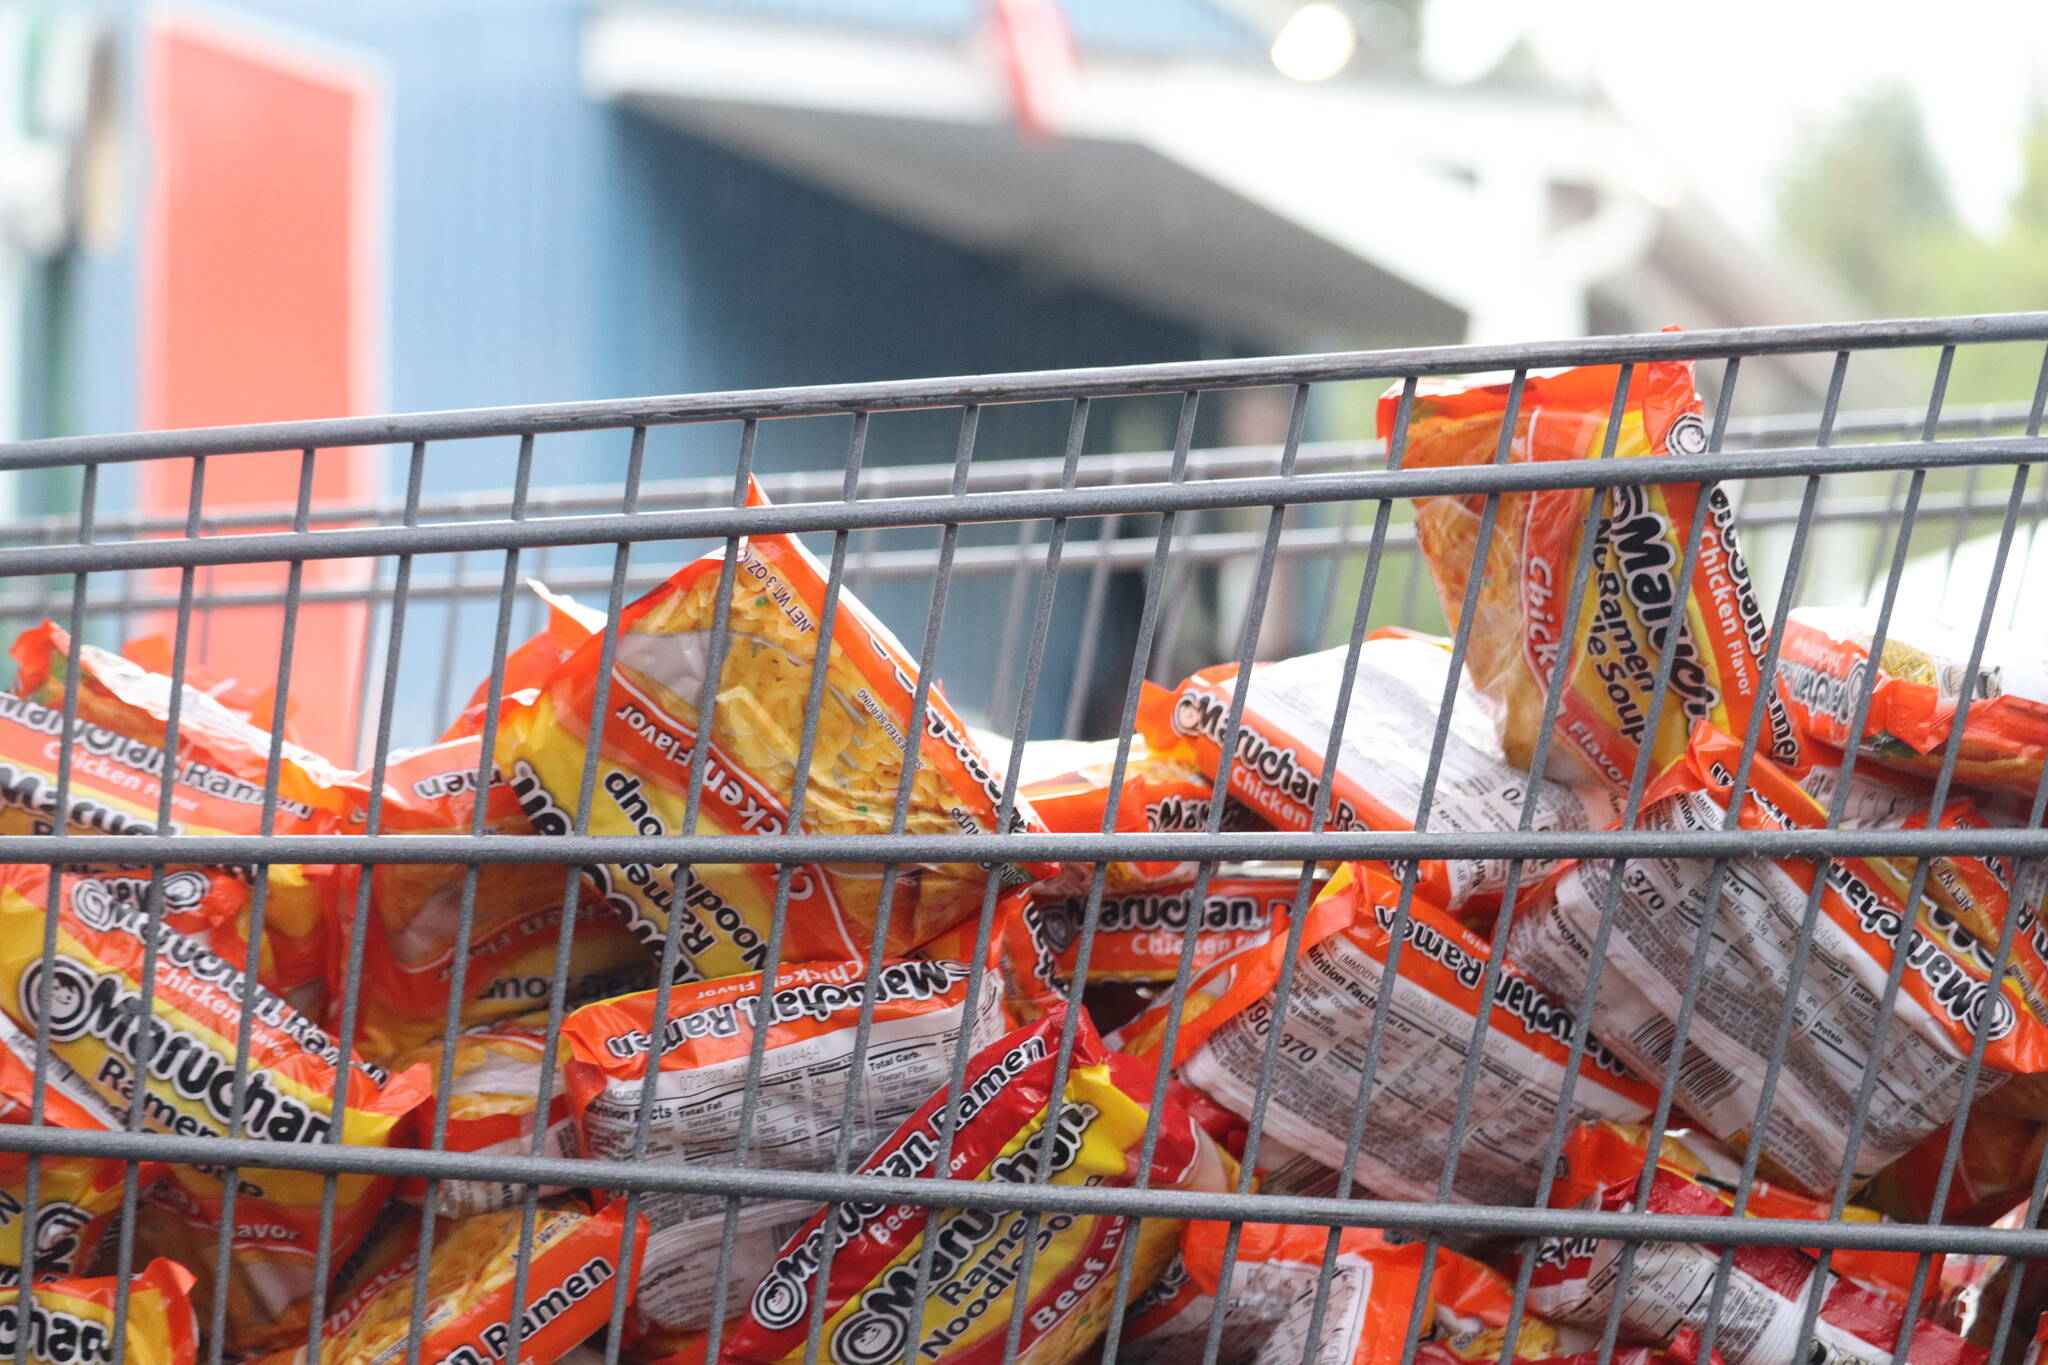 Southeast Alaska Food Bank is seeing higher demands in the face of fewer food supplies to offer. Top Ramen is just one of many food items listed on the food bank’s website as a most needed item. (Jonson Kuhn / Juneau Empire)